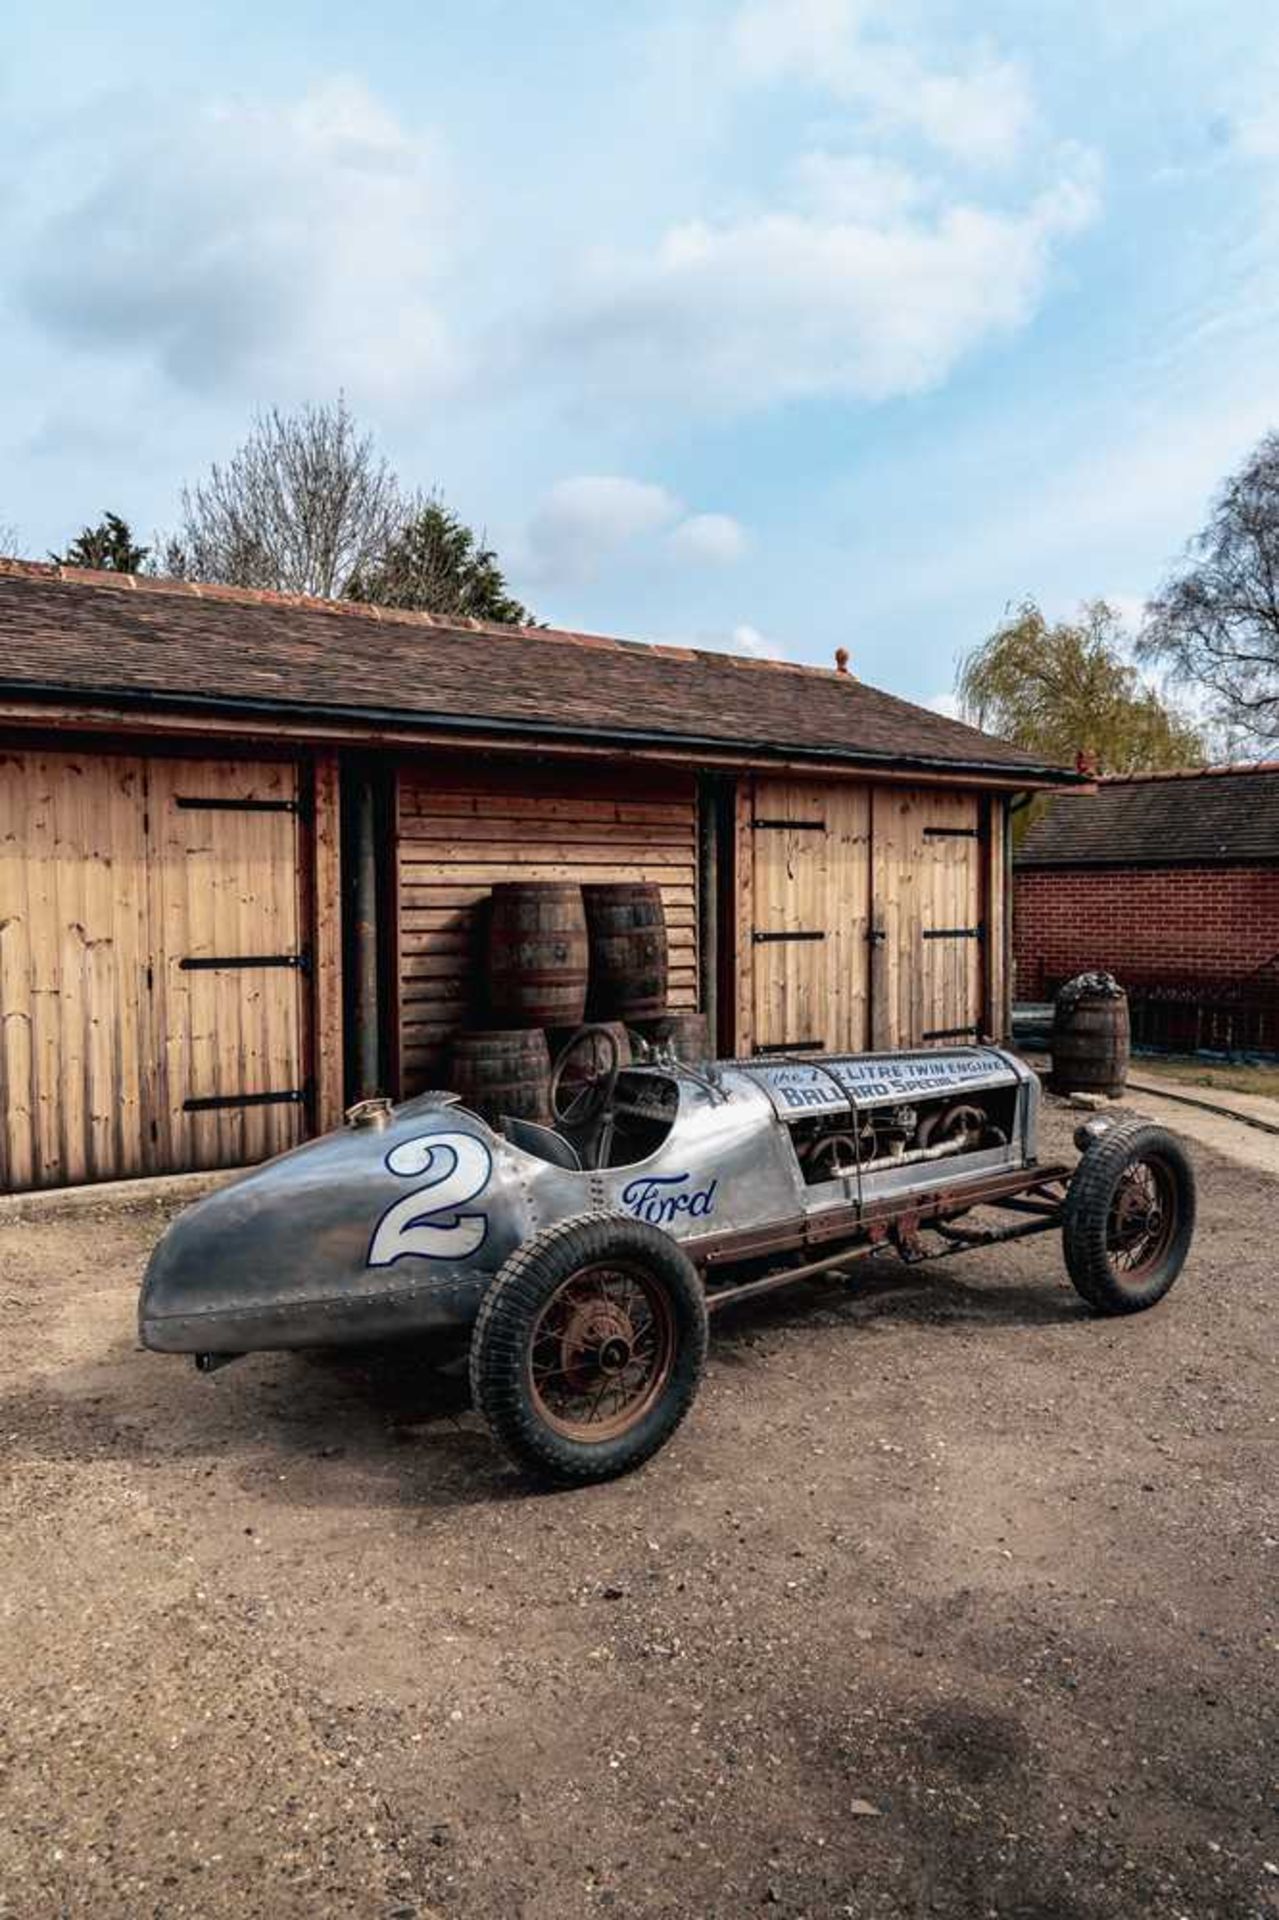 1930 Ford Model A "The Ballard Special" Speedster One off, bespoke built twin-engined pre-war racing - Image 17 of 94